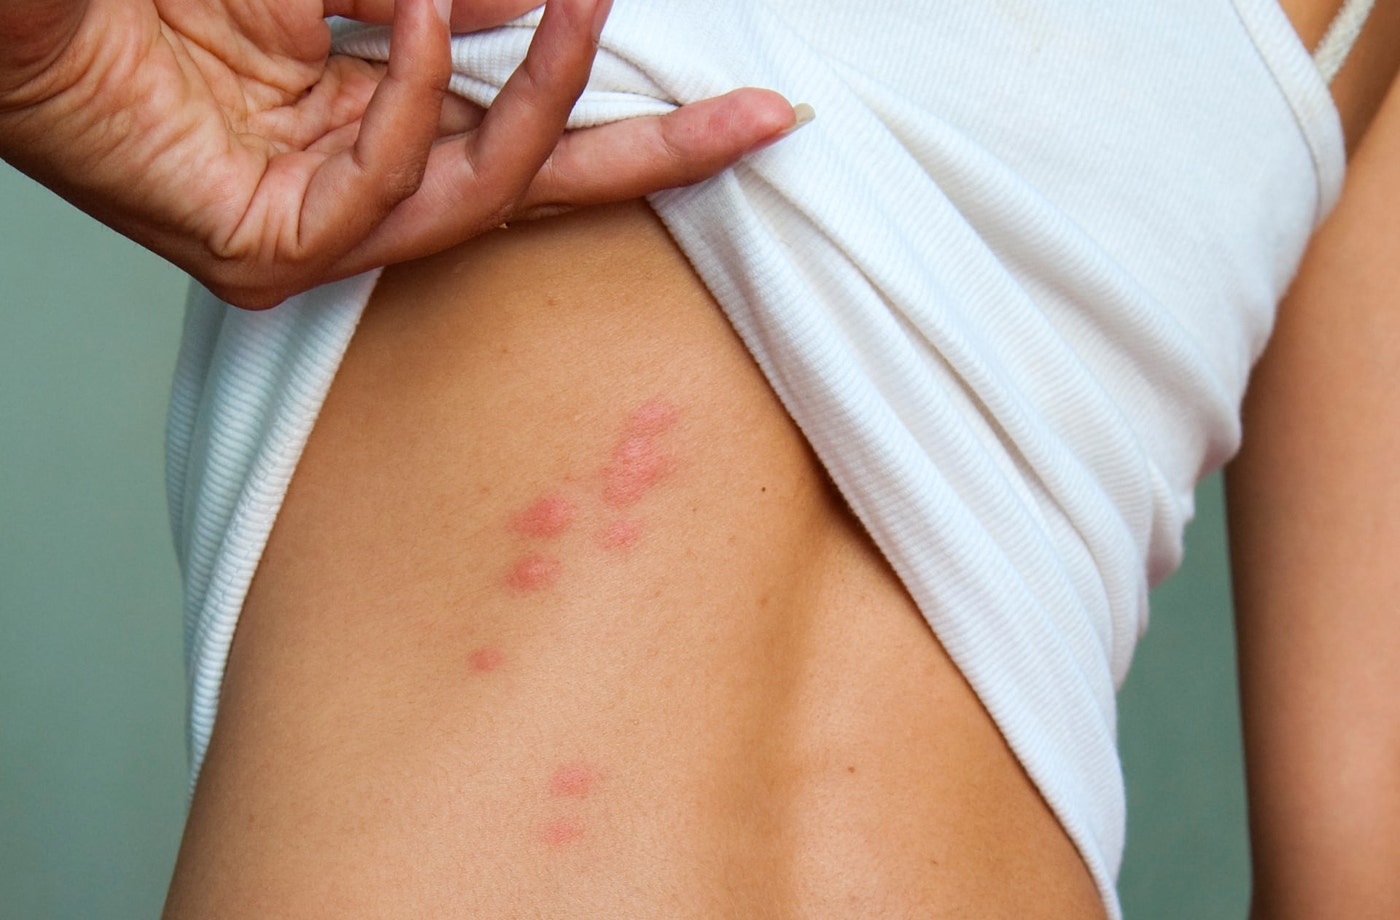 Best care for bug bites: Doctors share treatment tips for minor and severe bites